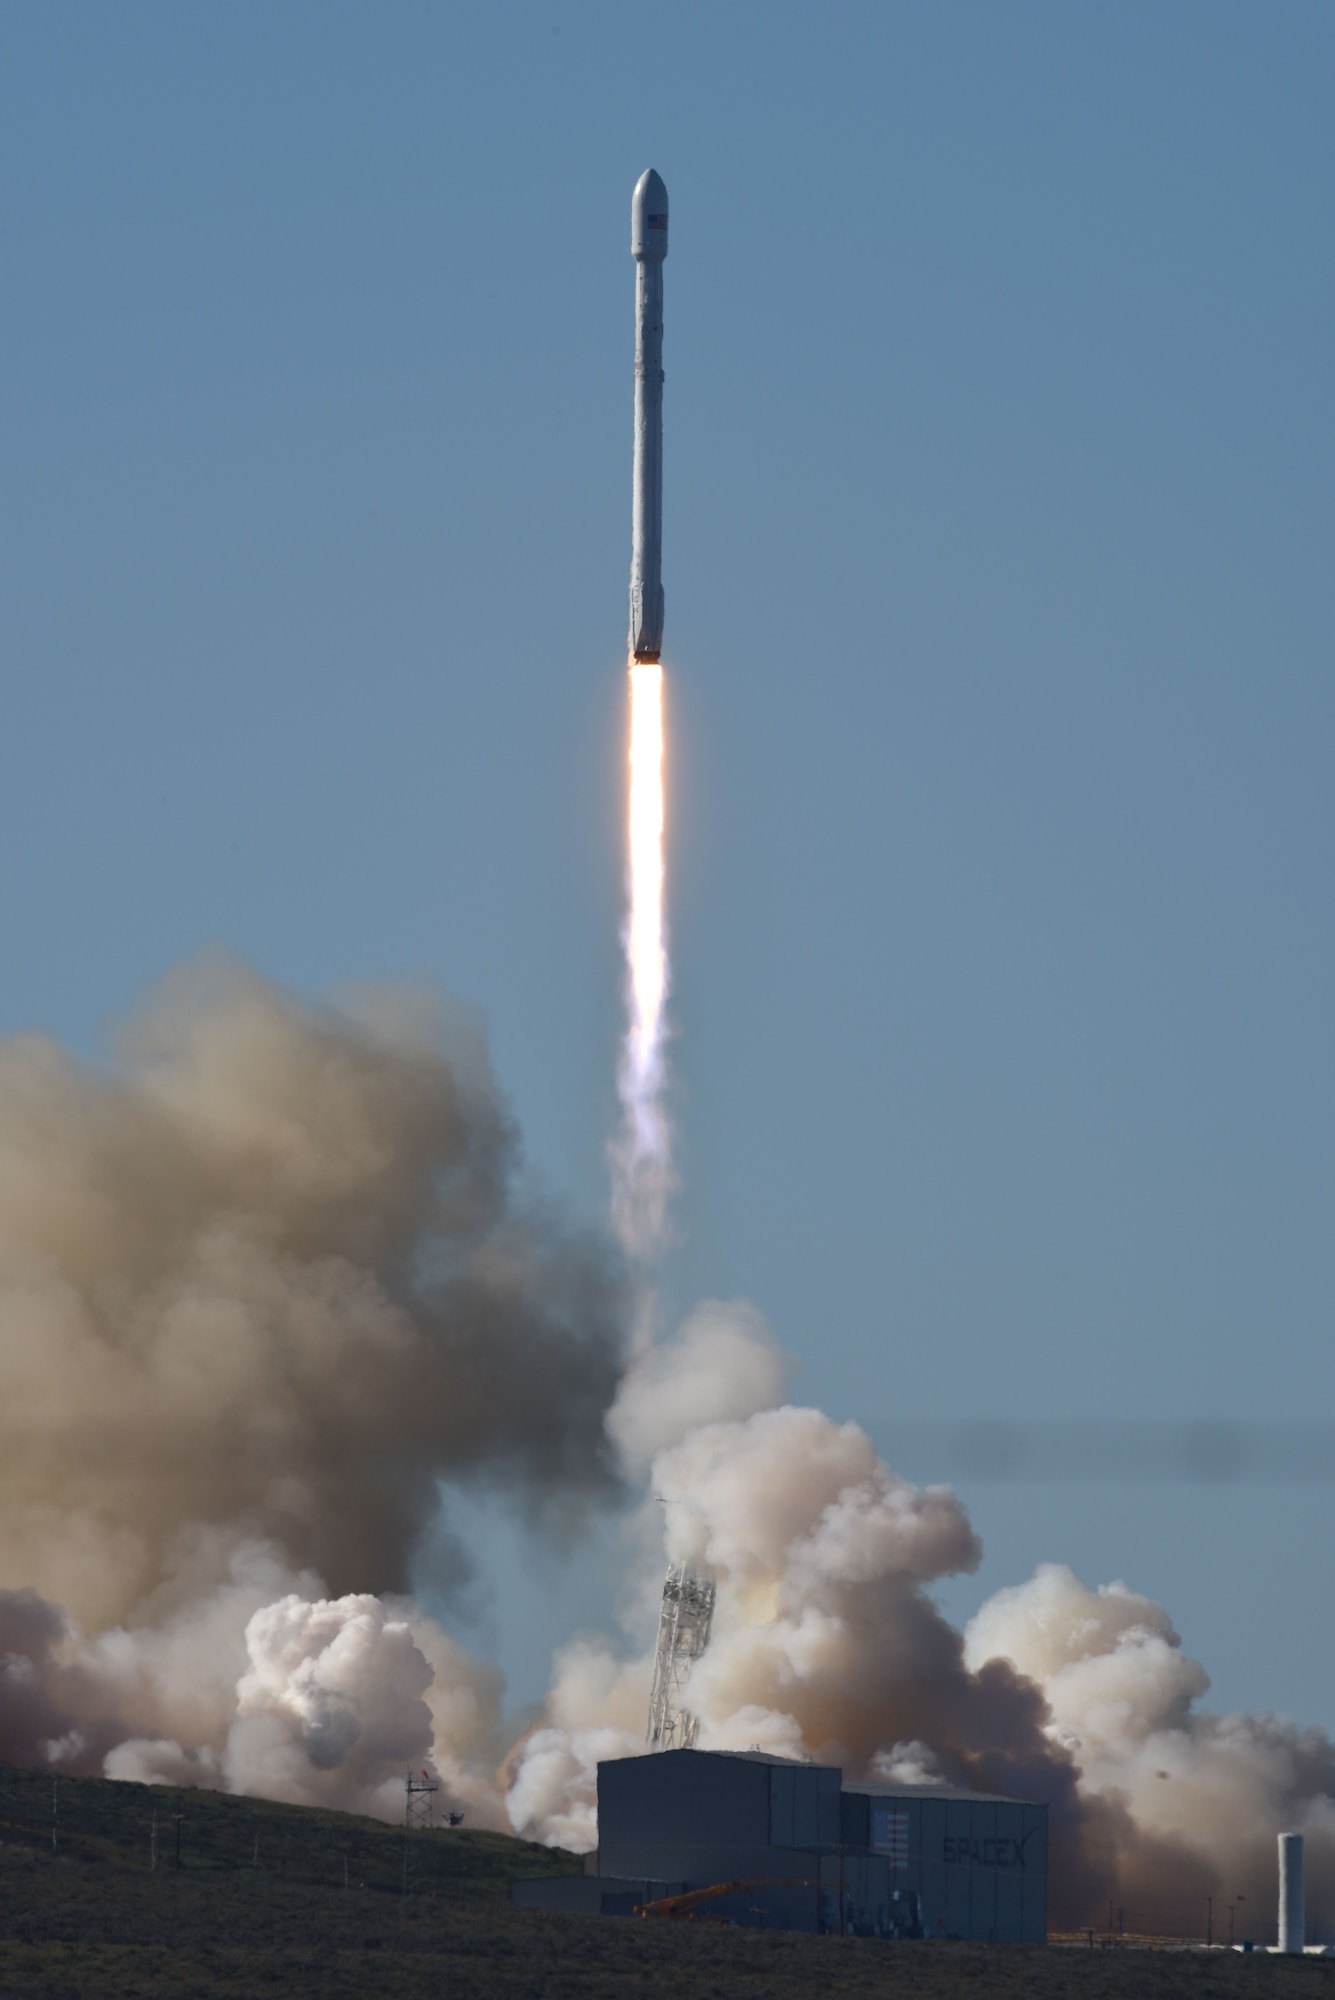 An Iridium NEXT satellite onboard a SpaceX Falcon 9 rocket launches from Space Launch Complex-4, Jan. 14, 2017, Vandenberg Air Force Base, Calif. Iridium NEXT will replace the world’s largest commercial satellite network of low-earth orbit satellites in what will be one of the largest “tech upgrades” in history. With multiple organizations working toward the same goal of mission success, strong working relationships among organizations are paramount. (U.S. Air Force photo by Senior Airman Ian Dudley/Released)